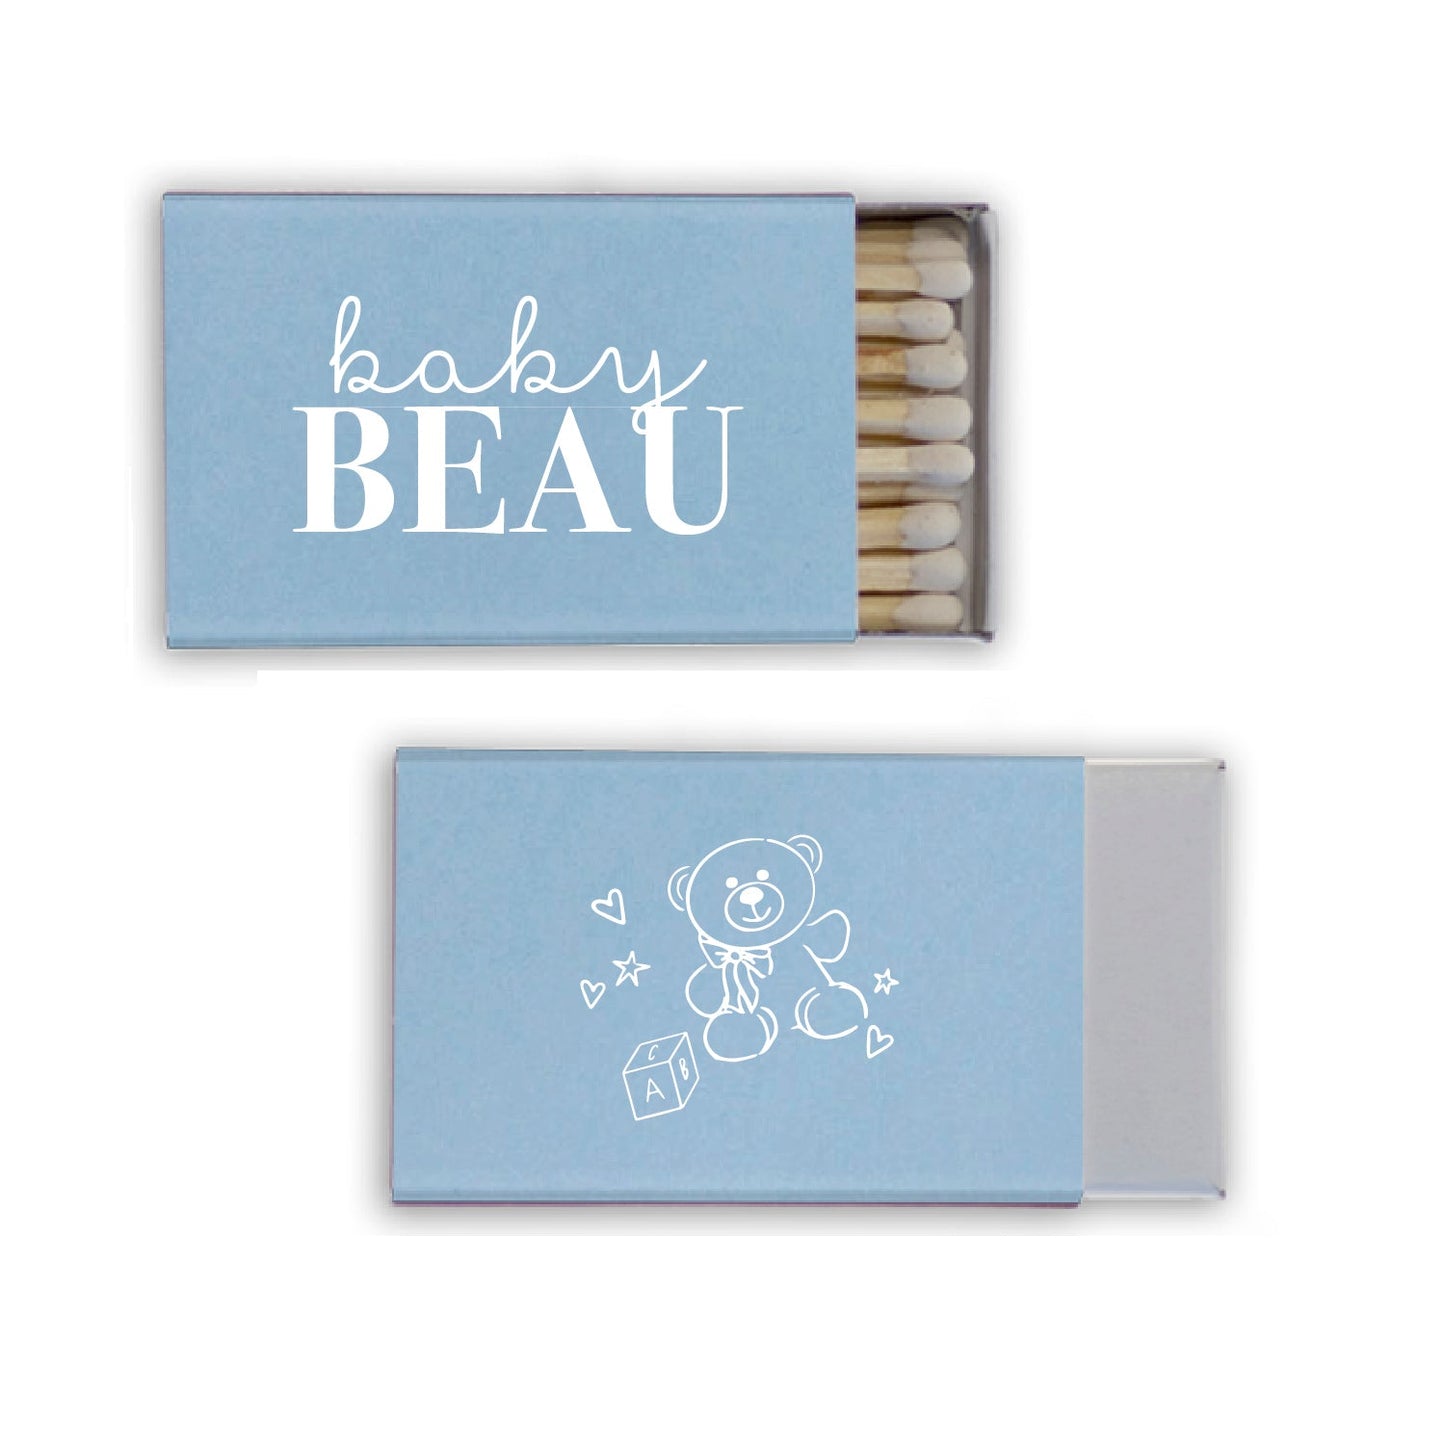 Baby Bear Baby Shower Personalized Match Boxes